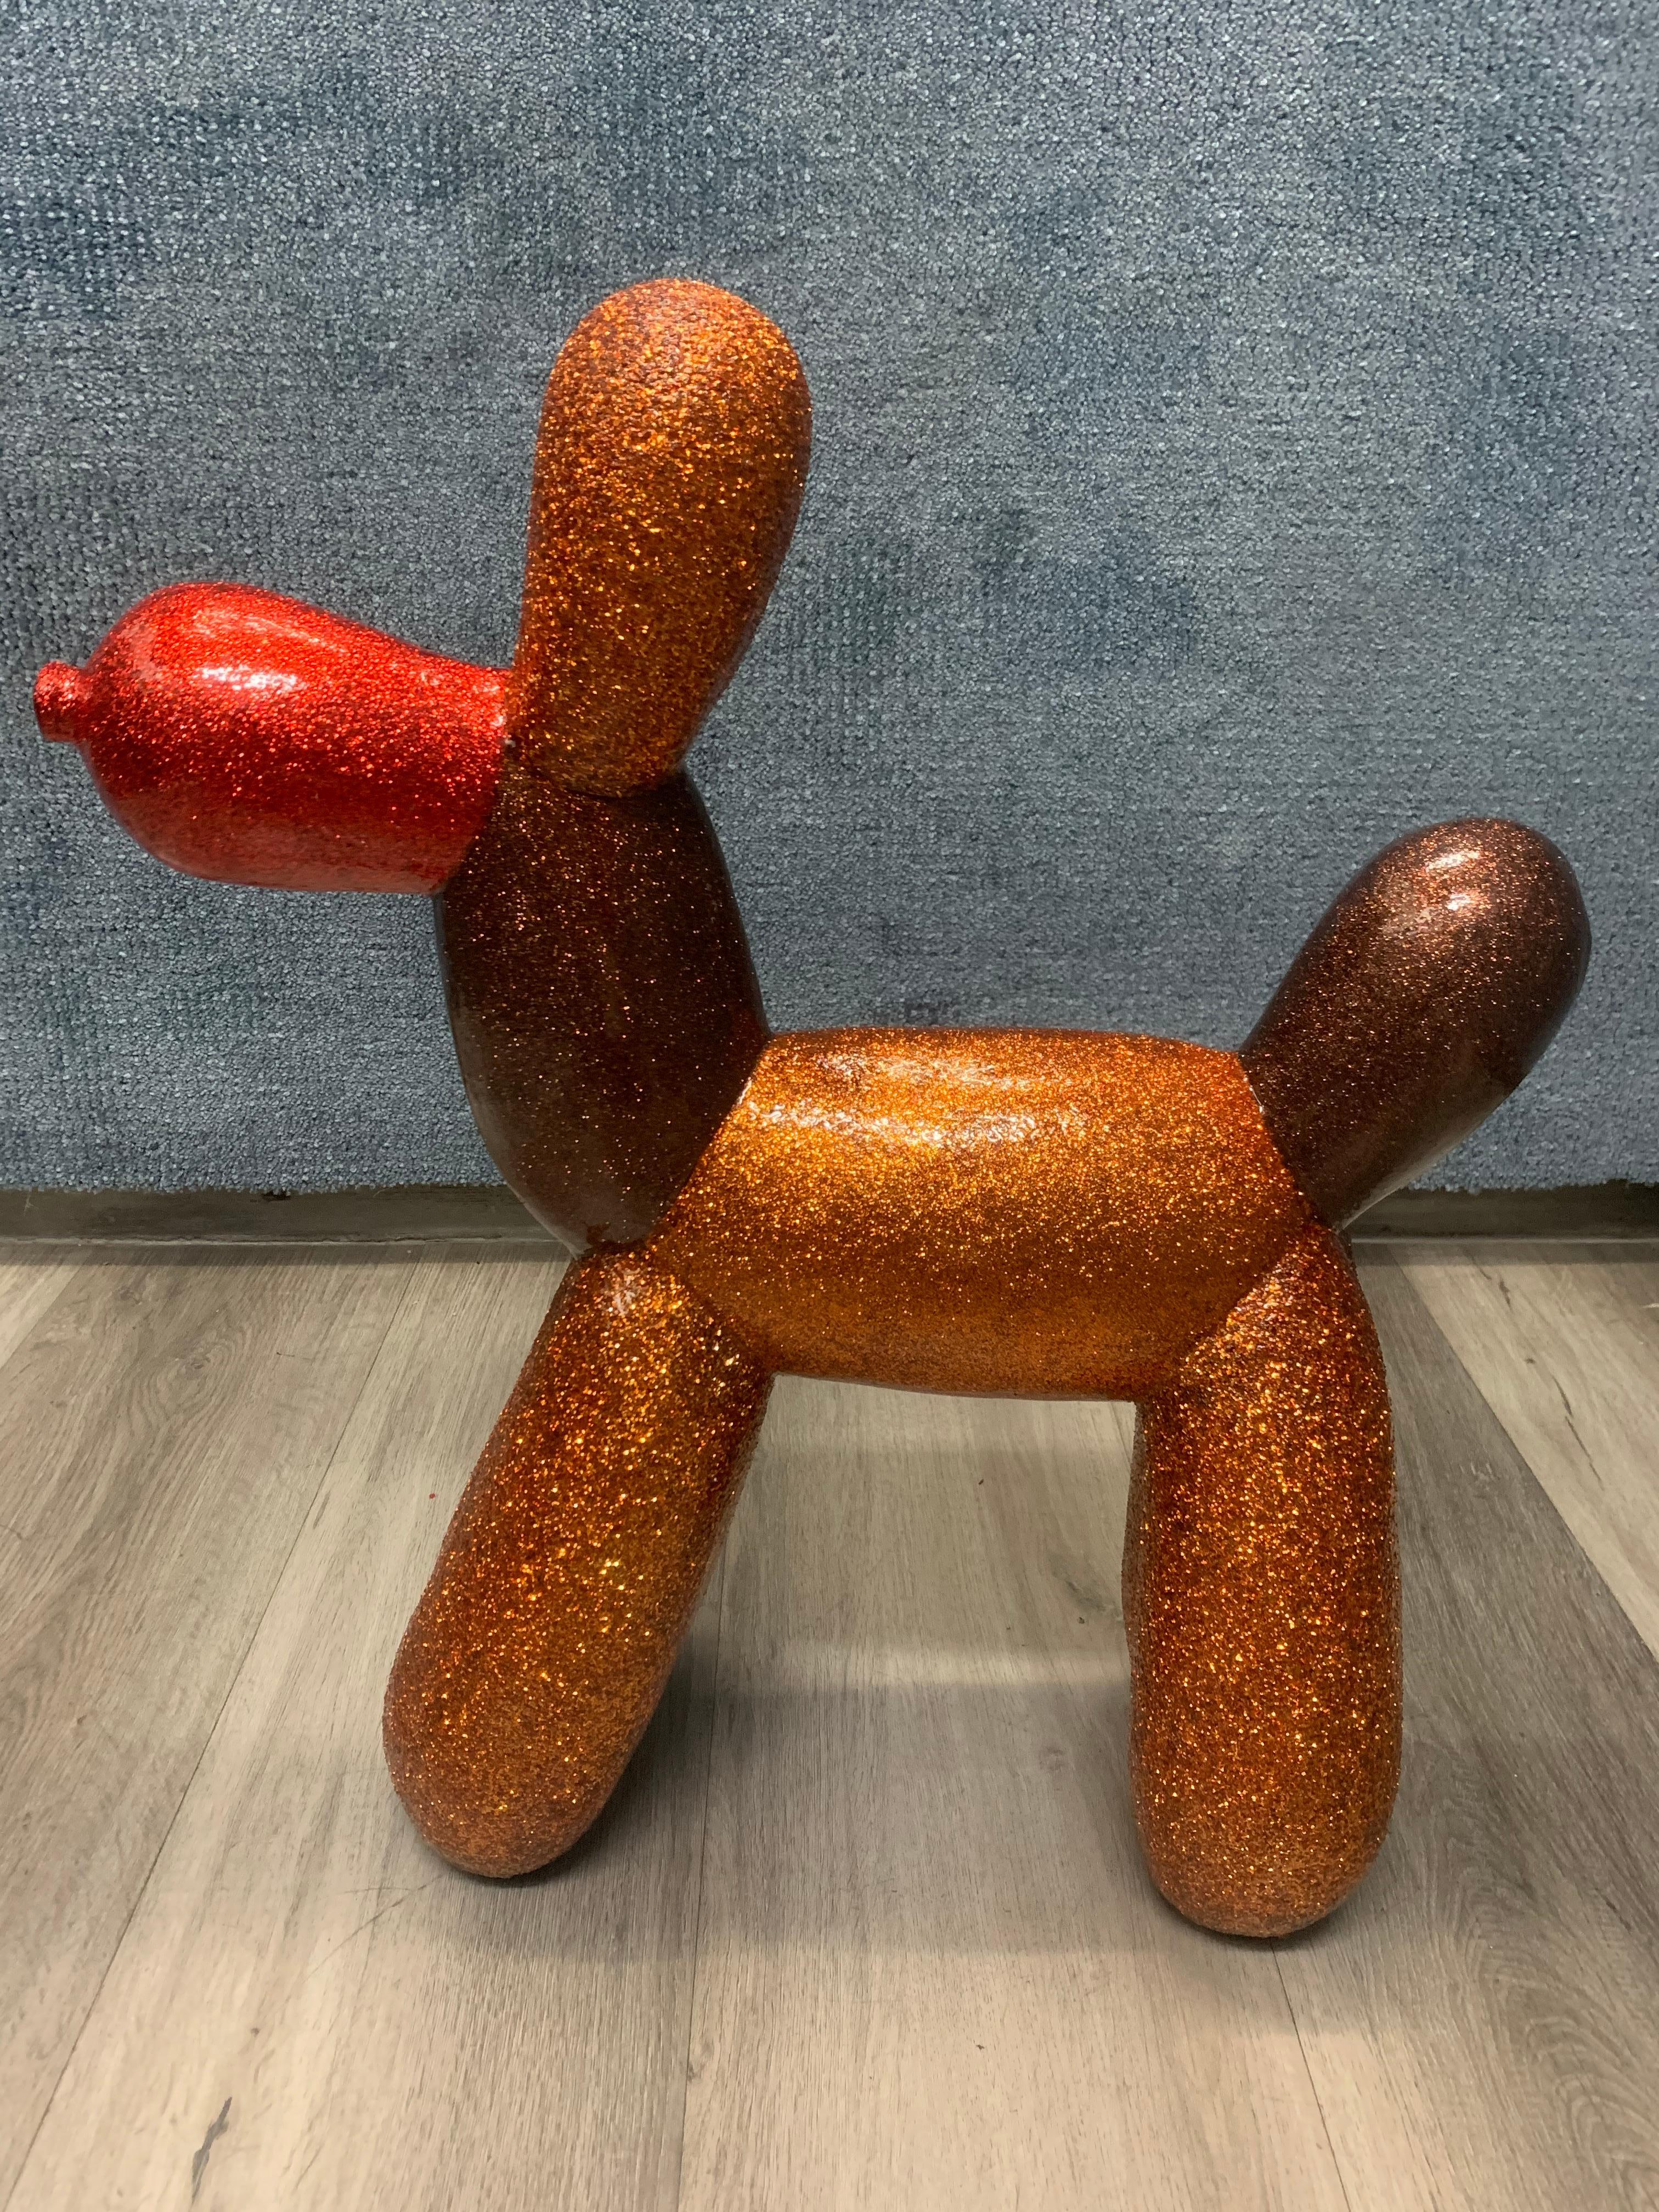 Mauro Oliveira Figurative Sculpture - BALLOON, THE RED-NOSED REINDOG!